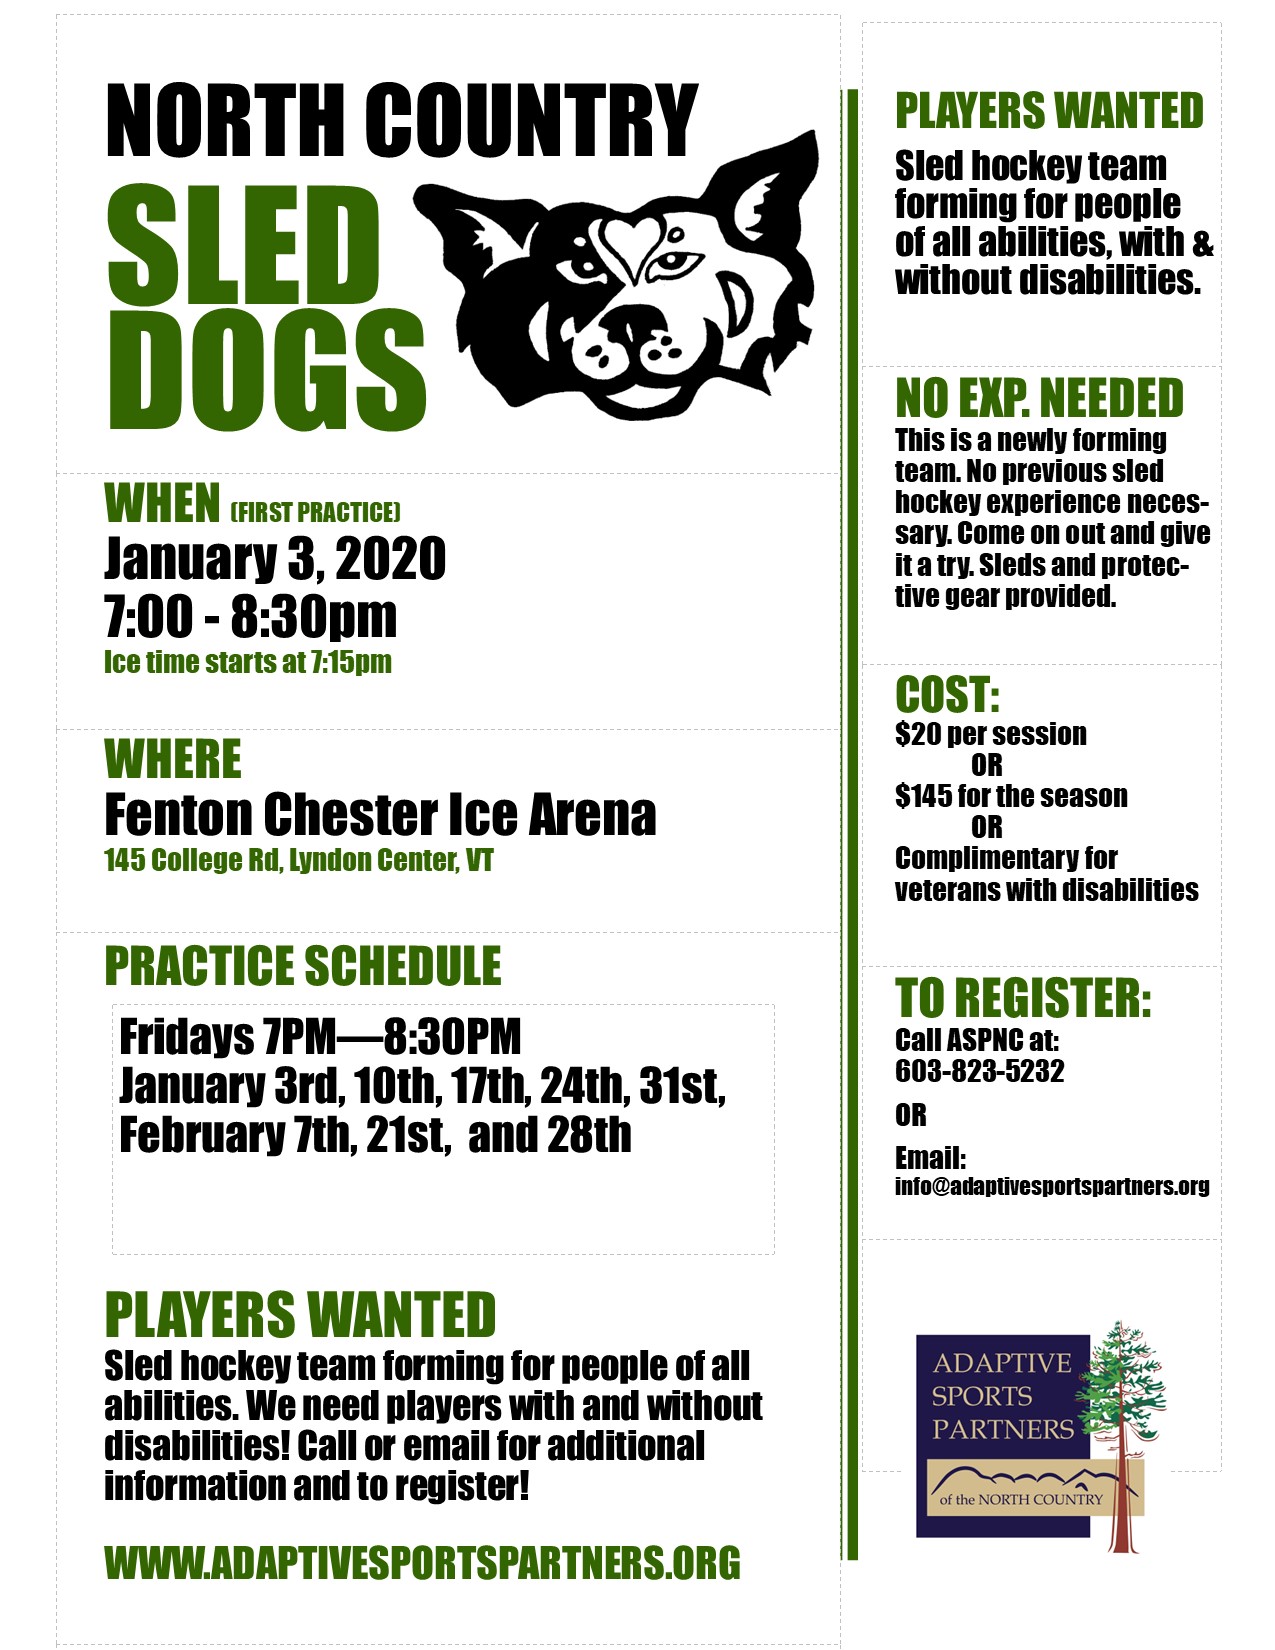 Seasonal Sled Hockey program. The North Country Sled Dogs will be holding (mostly) weekly practice sessions. Come and join the team! Open to all ability levels and to those with and without disabilities. All equipment provided.  Program Dates: January 3, 2020 - February 28, 2020 (Not 2/14)  2020 1/3 - 7:15-8:30P 1/10 - 7:15-8:30P 1/17 - 7:15-8:30P 1/24 - 7:15-8:30P 1/31 - 7:15-8:30P 2/7 - 7:15-8:30P 2/21 - 7:15-8:30P 2/28 - 7:15-8:30P  Pre-registration necessary. Please contact the ASPNC Office at 603-823-5232, email info@adaptivesportspartners.org, or register online at https://aspnc.z2systems.com/eventReg.jsp?event=949&  Cost: $145 for the season (8 sessions) paid in advance or $20 per session paid as you go.   *A USA Hockey membership is also required, the fee for this is $40.  (https://www.usahockeyregistration.com/register_form_input.action)  *Annual membership required for participation in any ASPNC program activities. $25 annually  ASPNC is committed to providing sport, recreation, and wellness opportunities for any and all people of all abilities. We believe strongly that program fee should not be an additional barrier to participation. If financial assistance is needed please contact ASPNC by email at info@adaptivesportspartners.org.